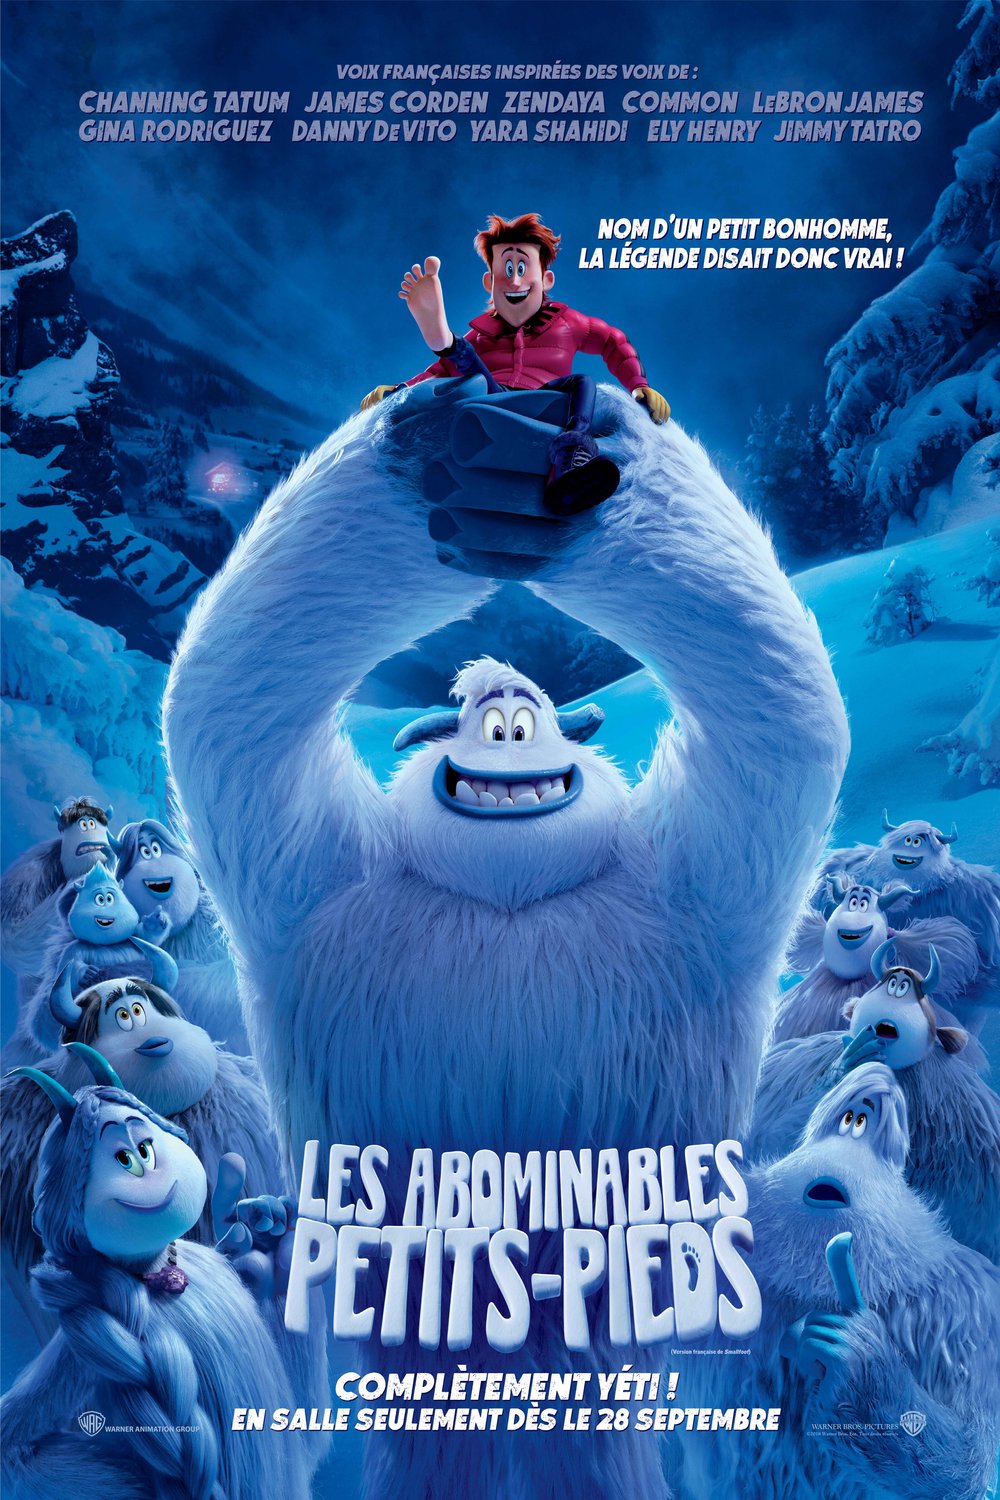 Poster of the movie Les Abominables Petits-Pieds